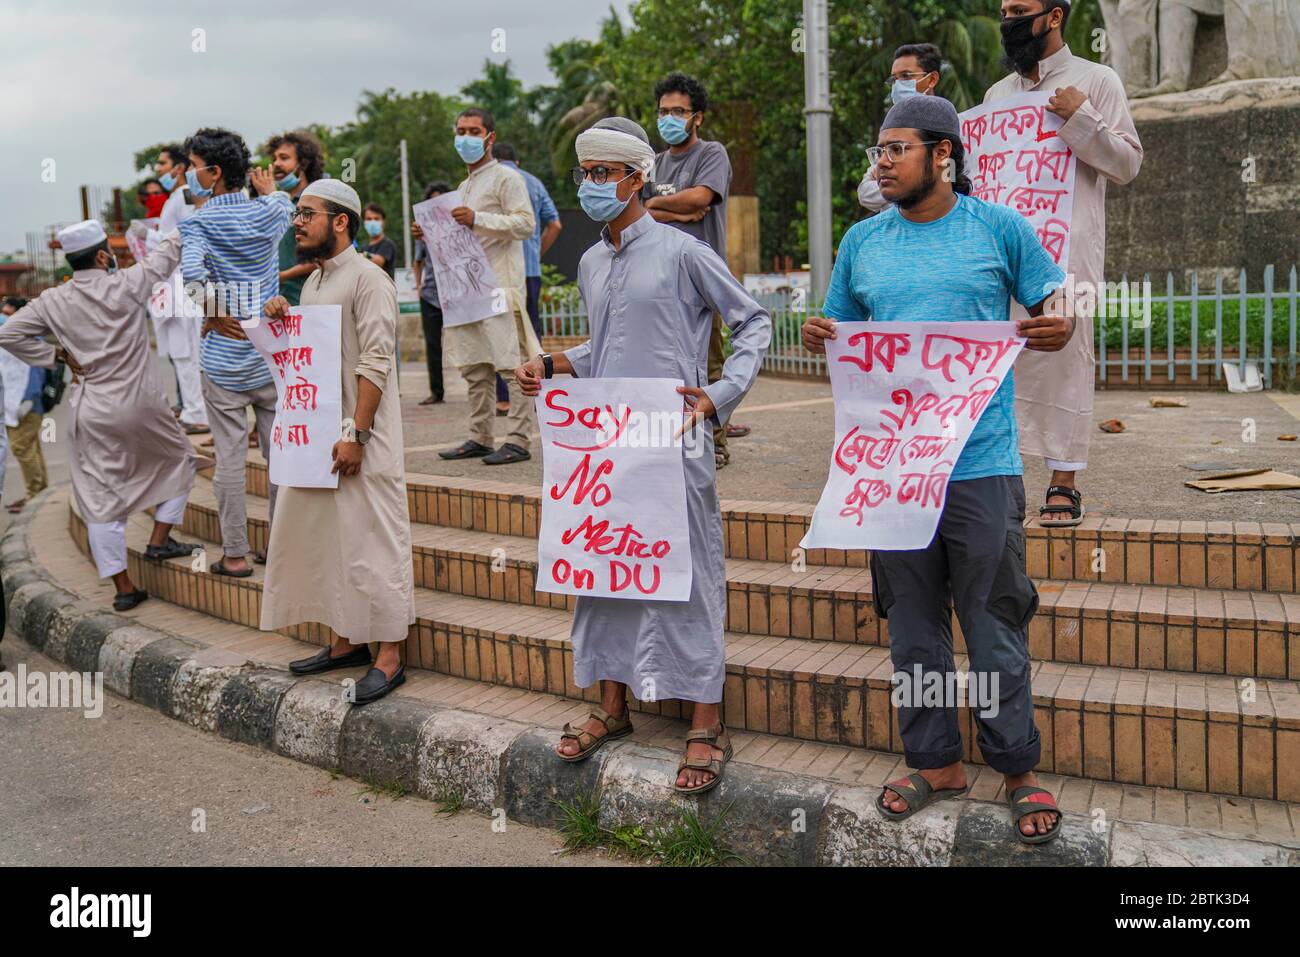 Demonstrators holding placards during the protest.Bangladesh Student's Union members have demanded to stop metro rail construction within the campus area at Raju Memorial Sculpture close to Dhaka University. Stock Photo